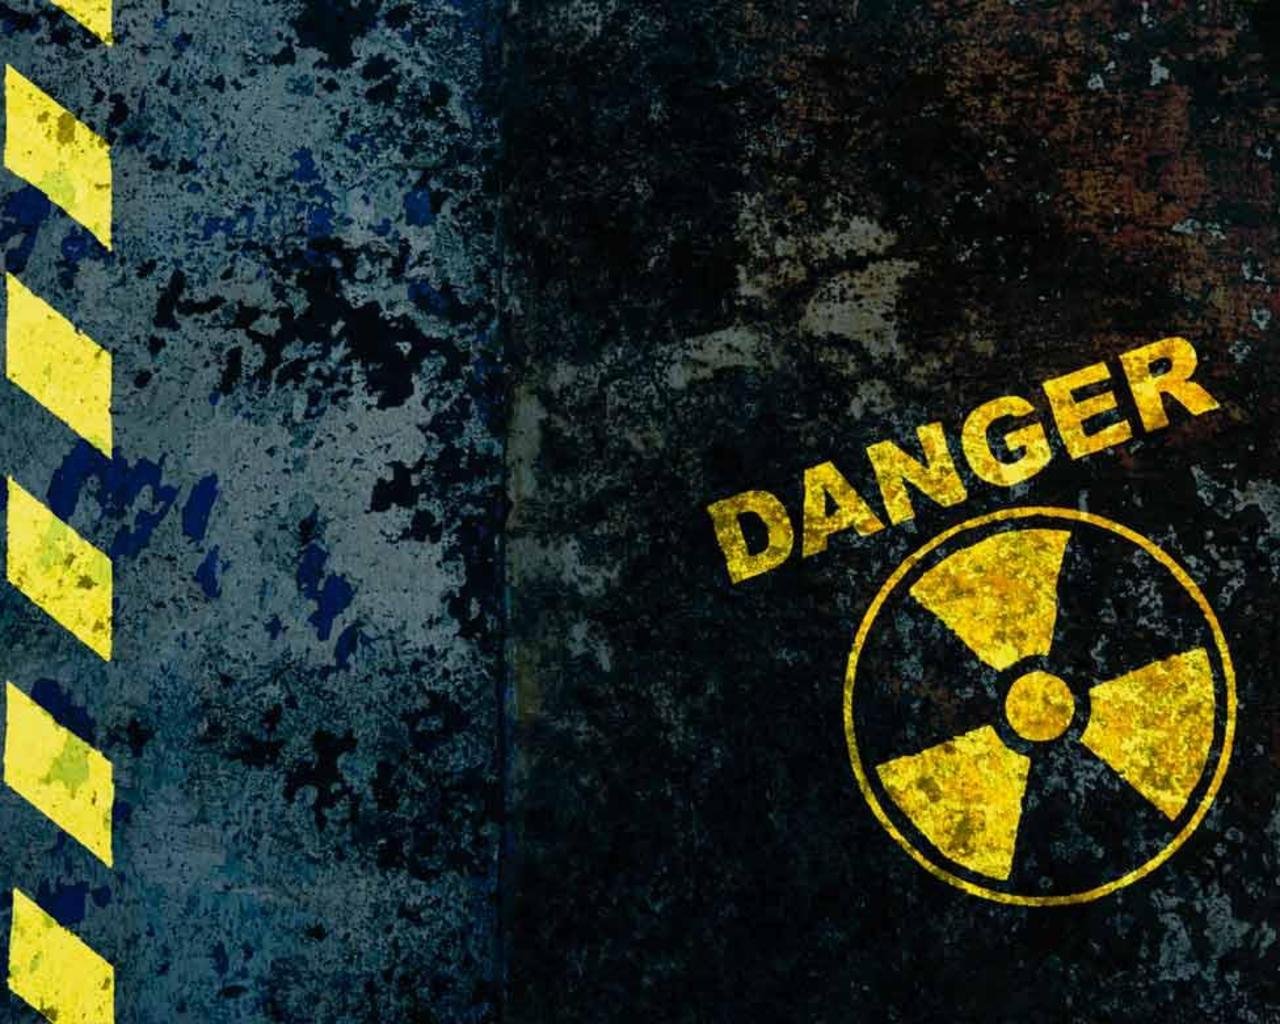 Signs of Danger and Nuclear Threat - HD Wallpapers Widescreen